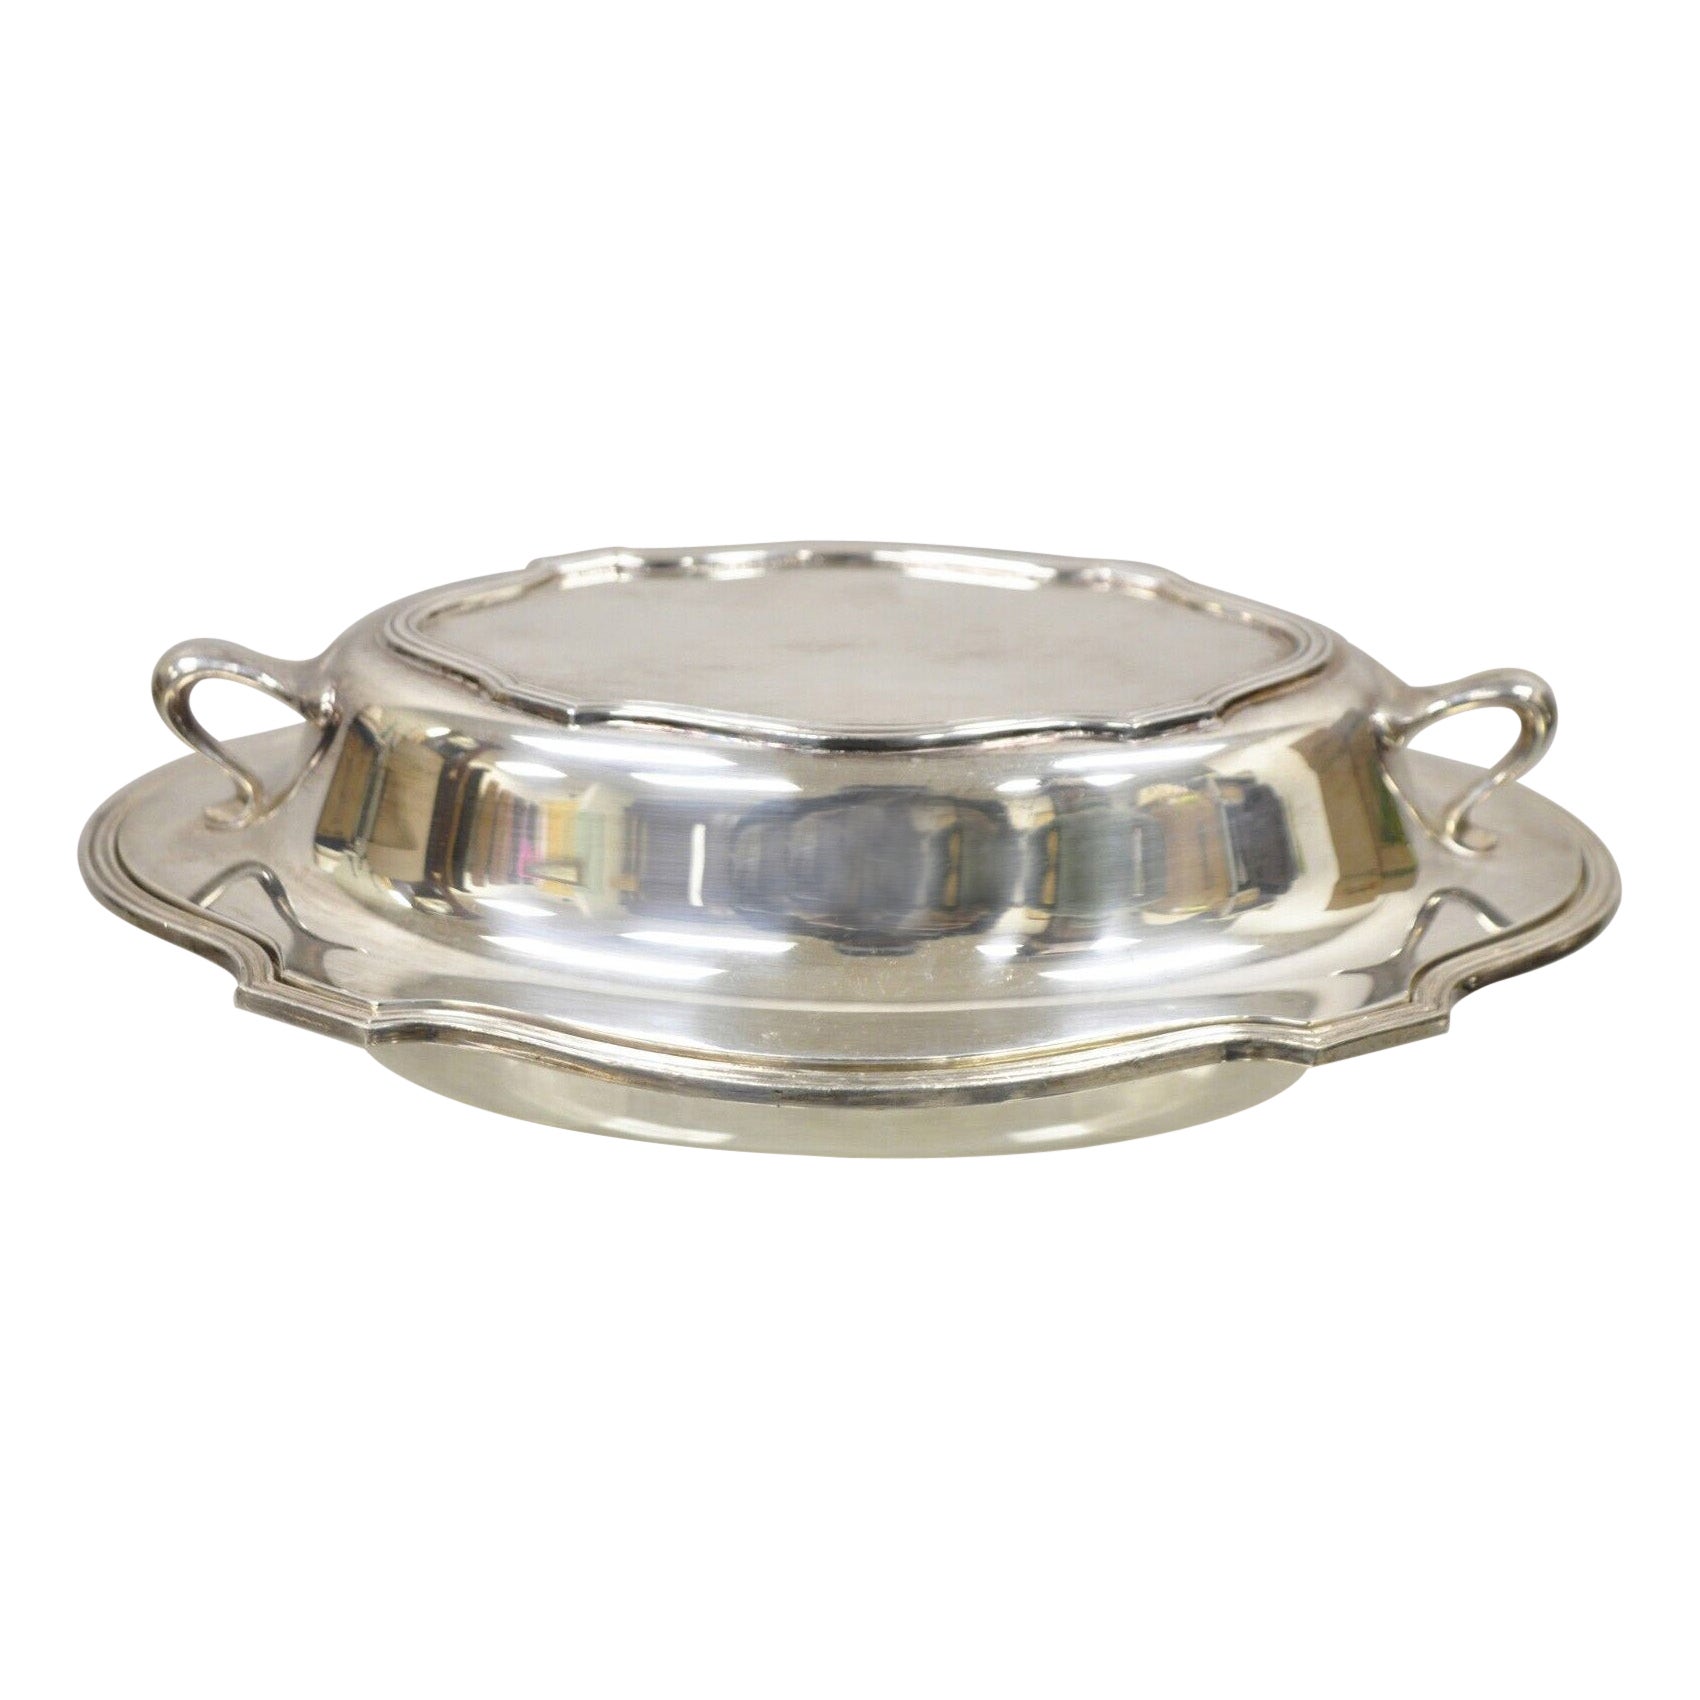 LBS Co English Regency Style Silver Plated Covered Serving Dish Vegetable Bowl For Sale